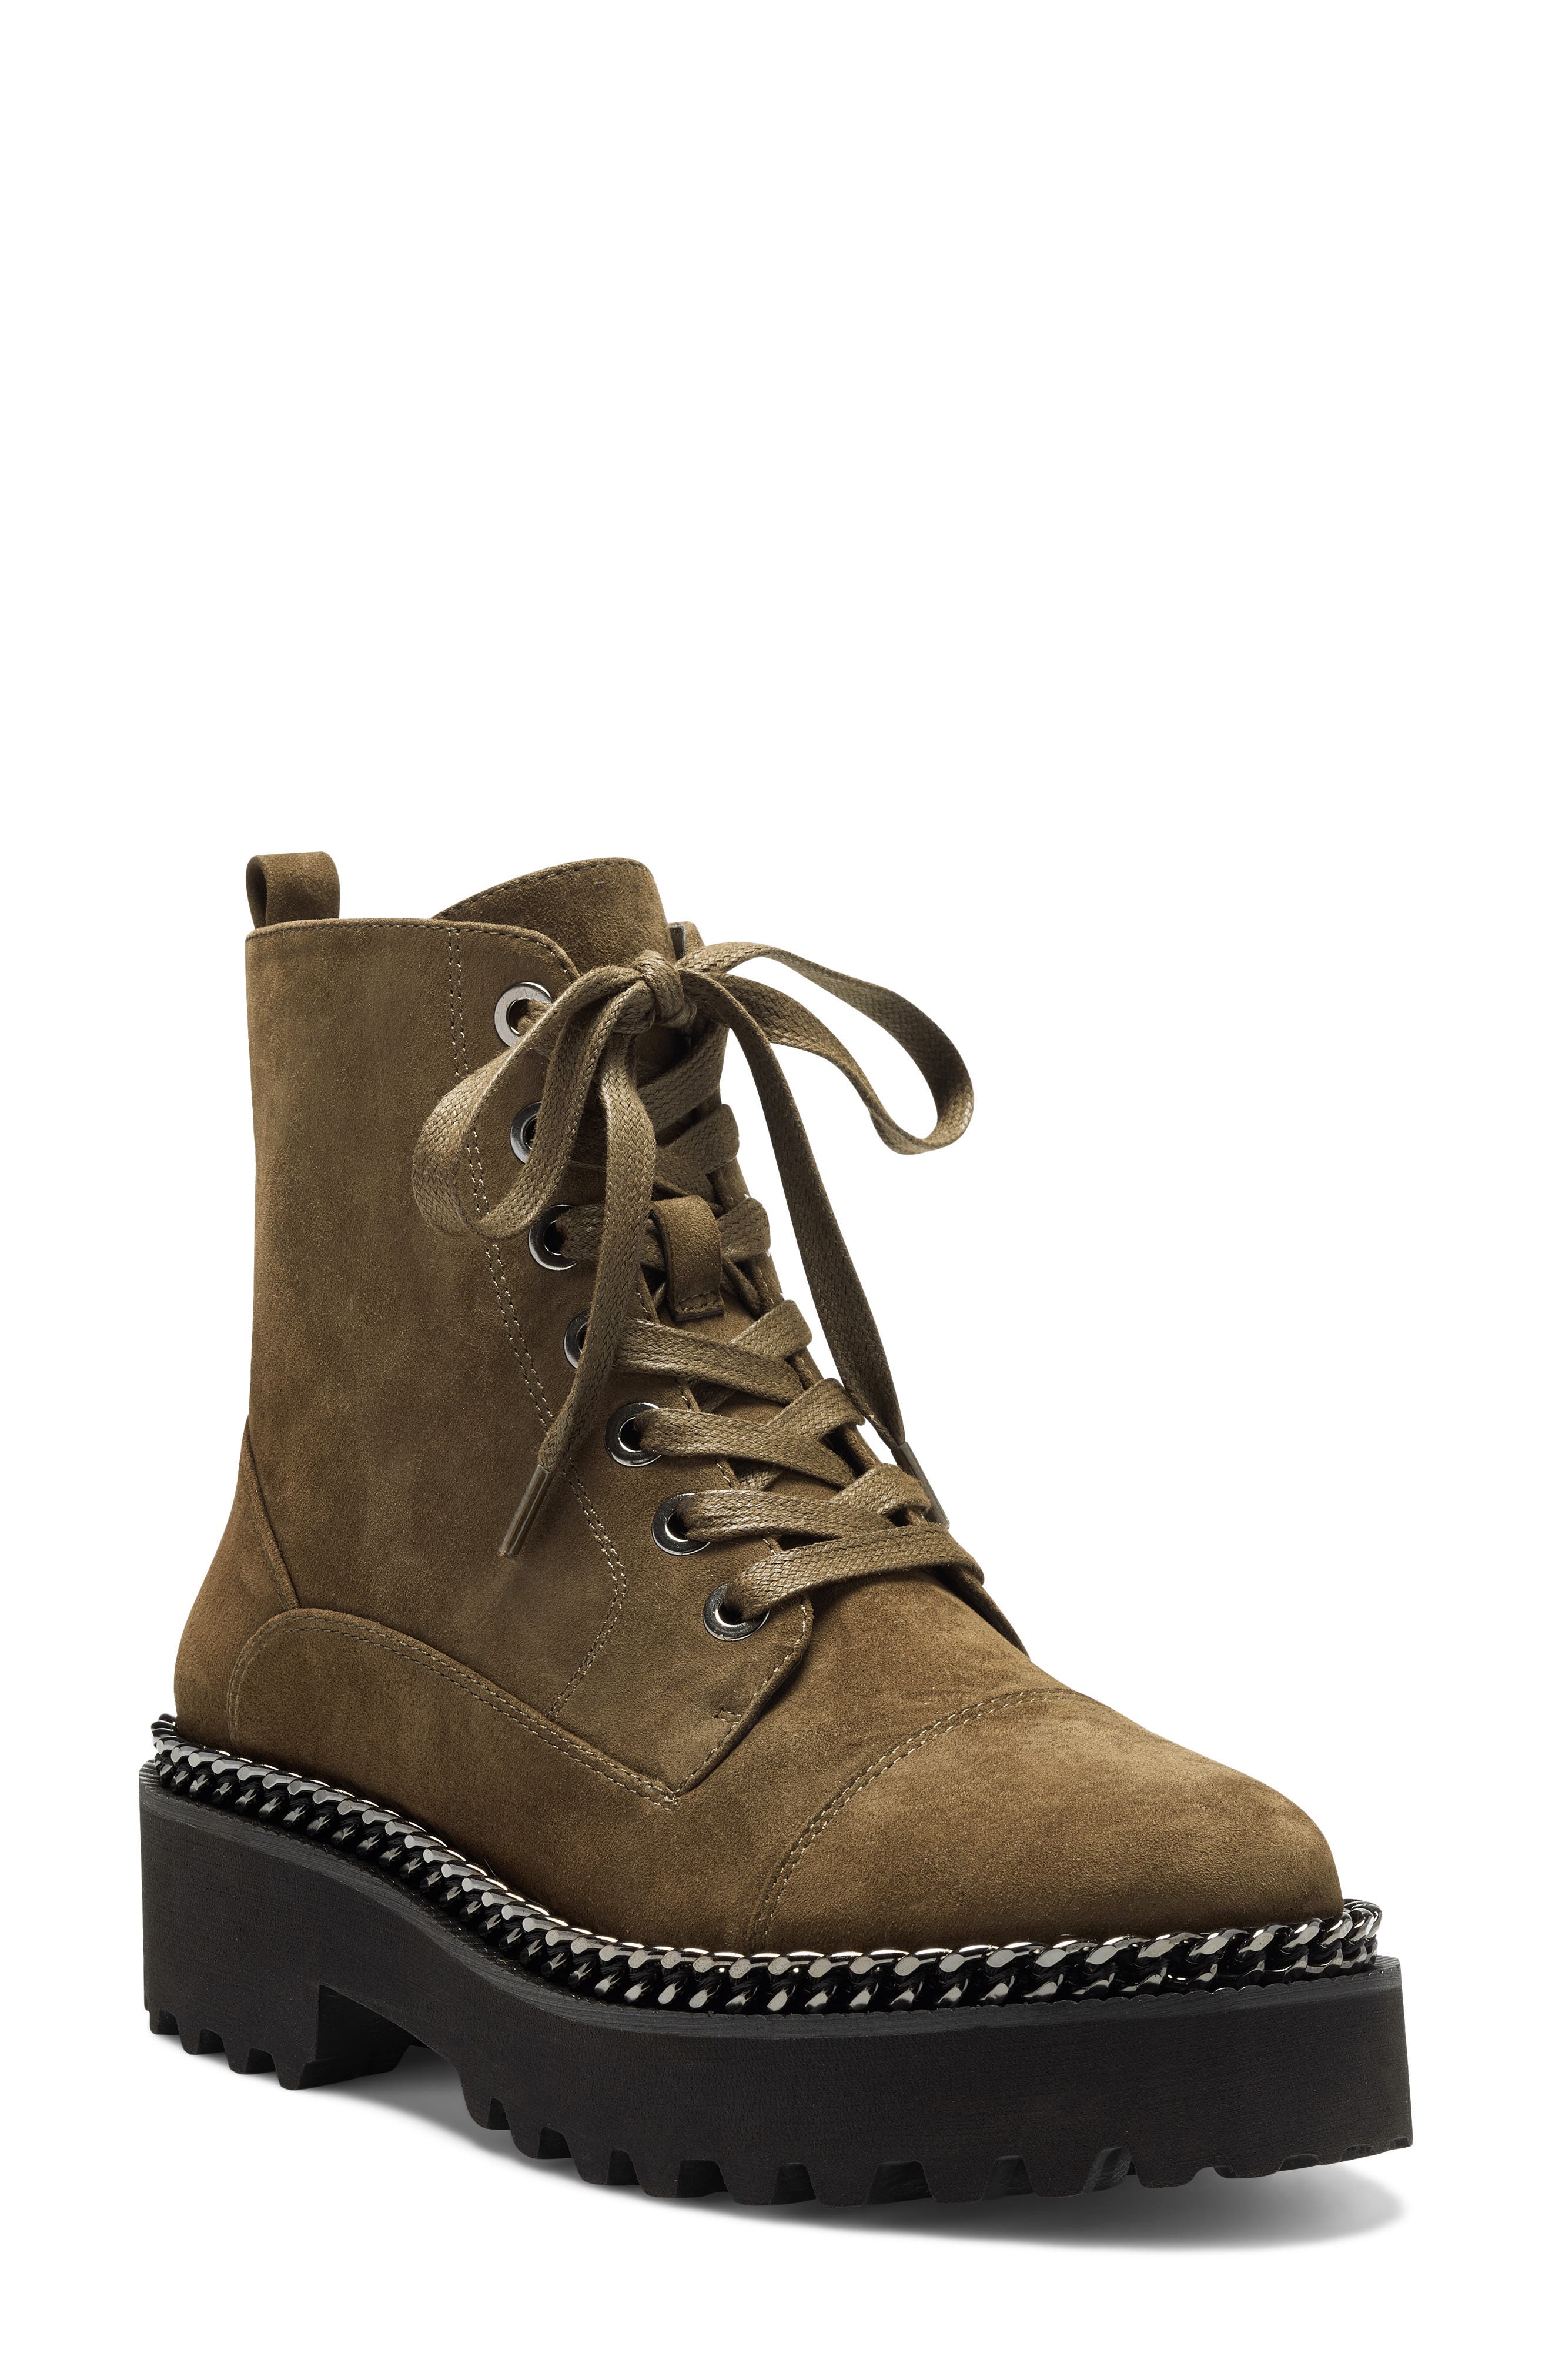 Vince Camuto Mindinta Chain Trim Combat Boot In Greek Olive Suede